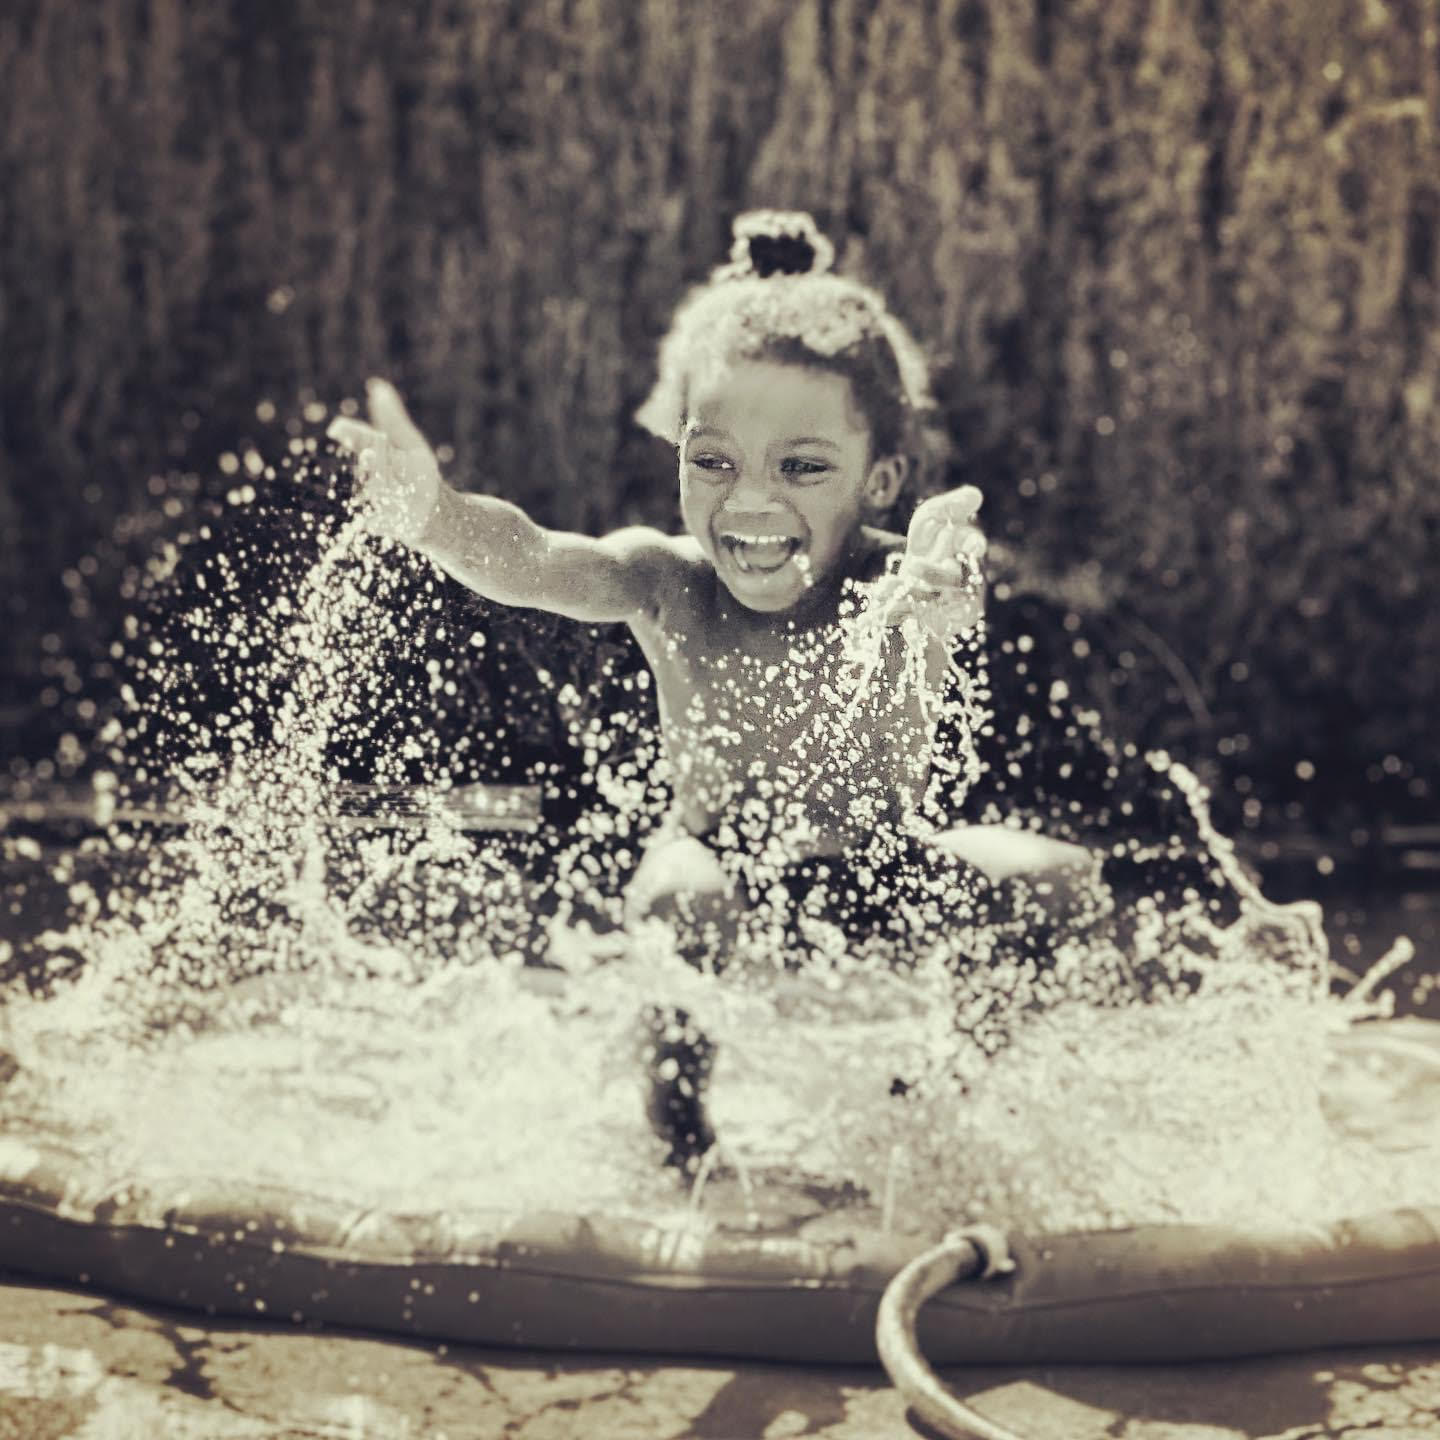 A young girl is sitting on a water-play mat filled with water and splashing it all around with a big open smile on her face. She is outside, with an indistinct background that is perhaps a fence or a hedge behind her.